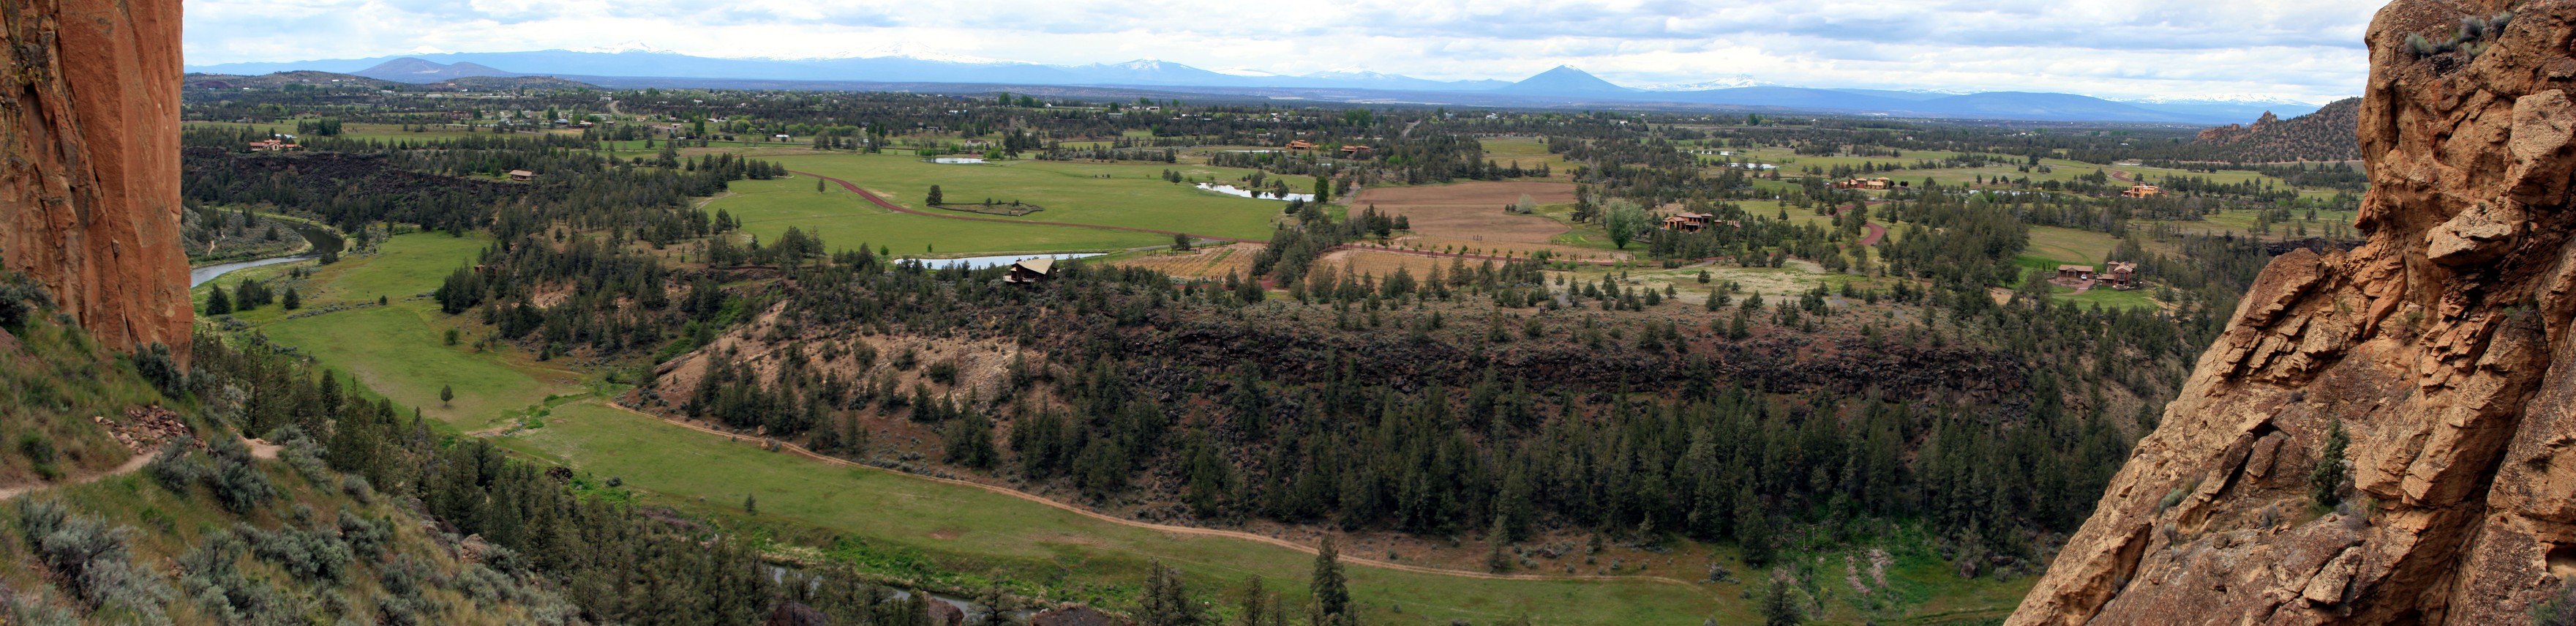 [Terrebonne, OR and Mt. Hood in Distance]